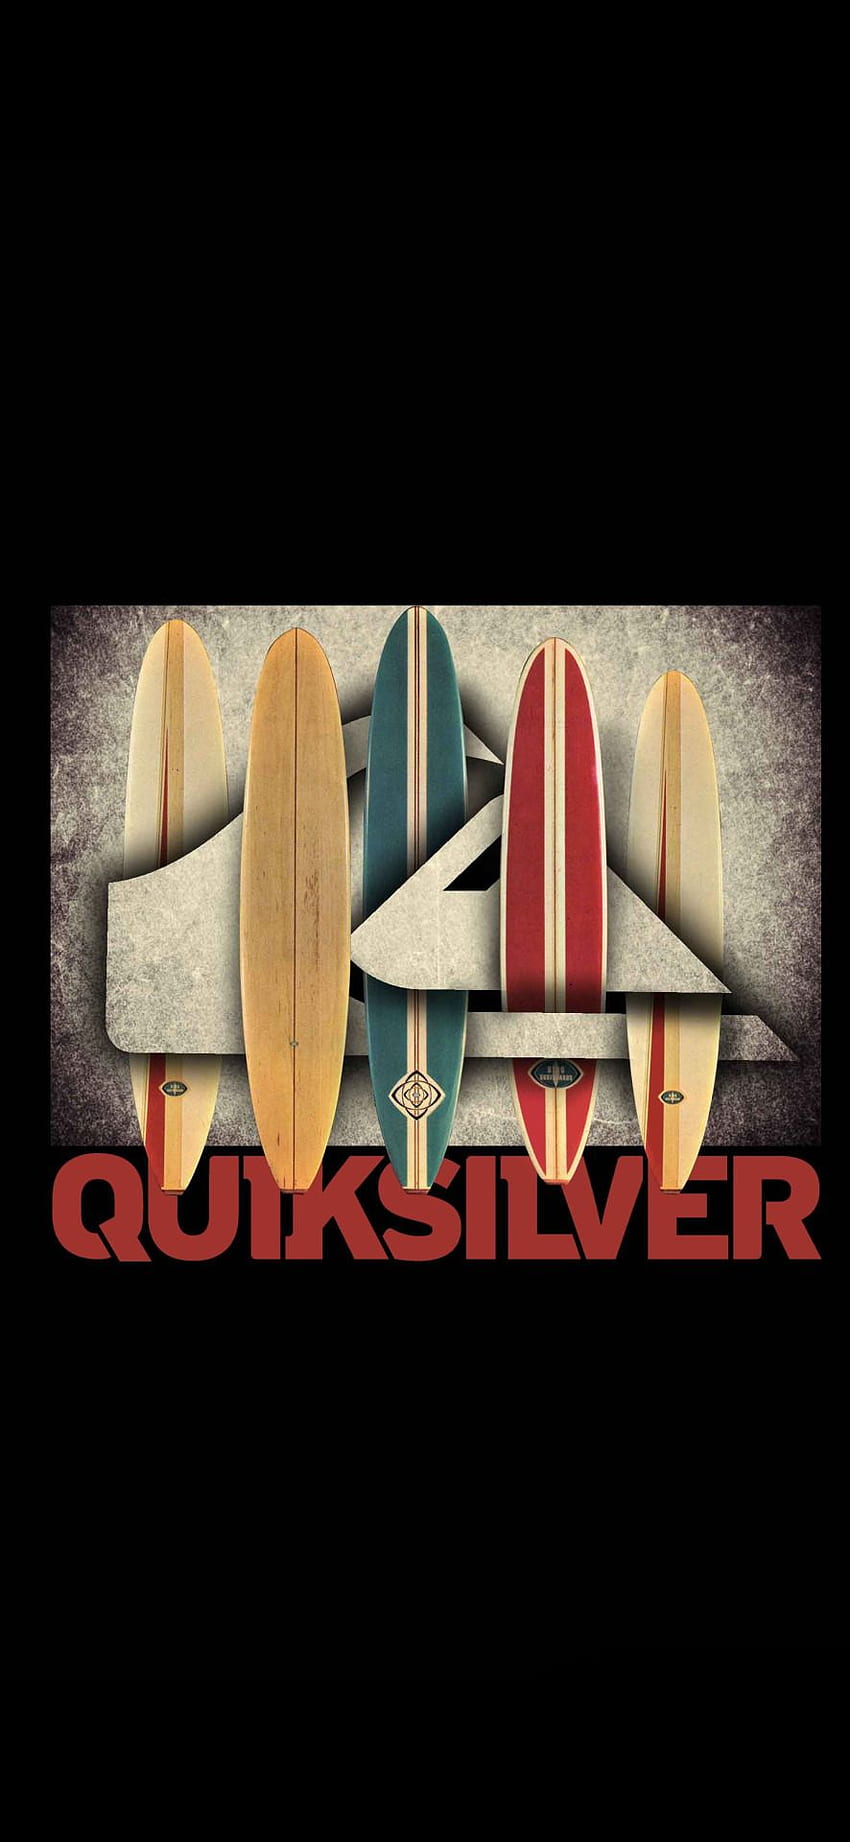 QuikSilver – Android & iPhone wallpaper ponsel HD